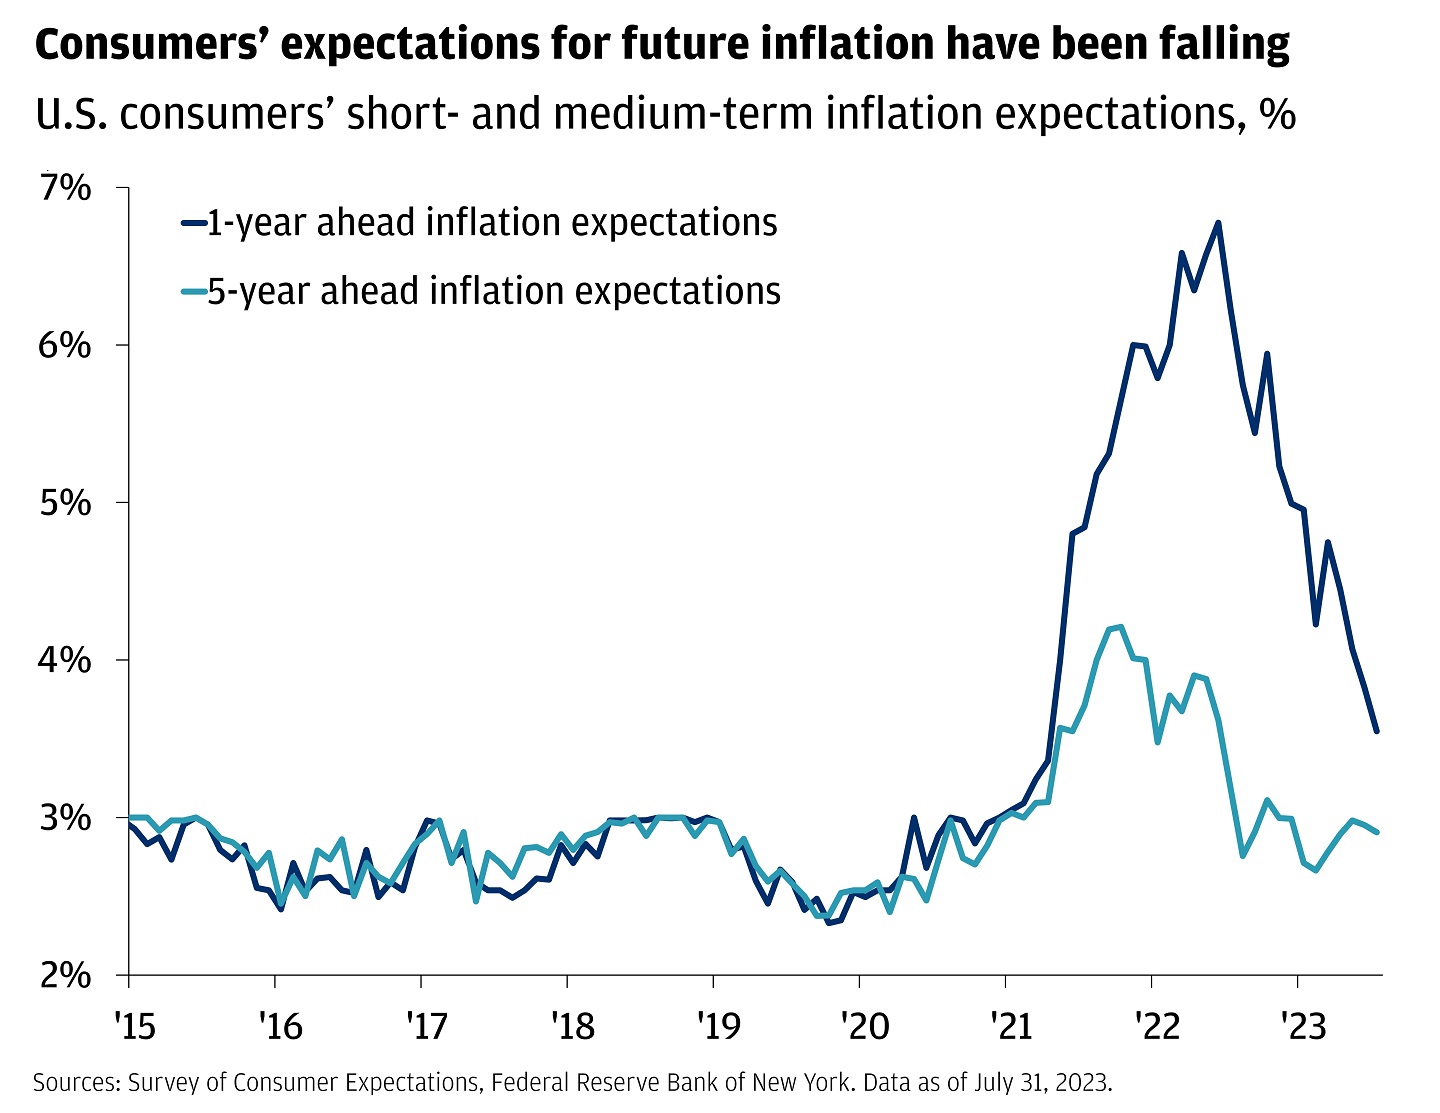 This chart shows U.S. consumers’ short (1 year) and medium (5 year) term inflation expectations in percentage points from January 2015 through July 2023. 